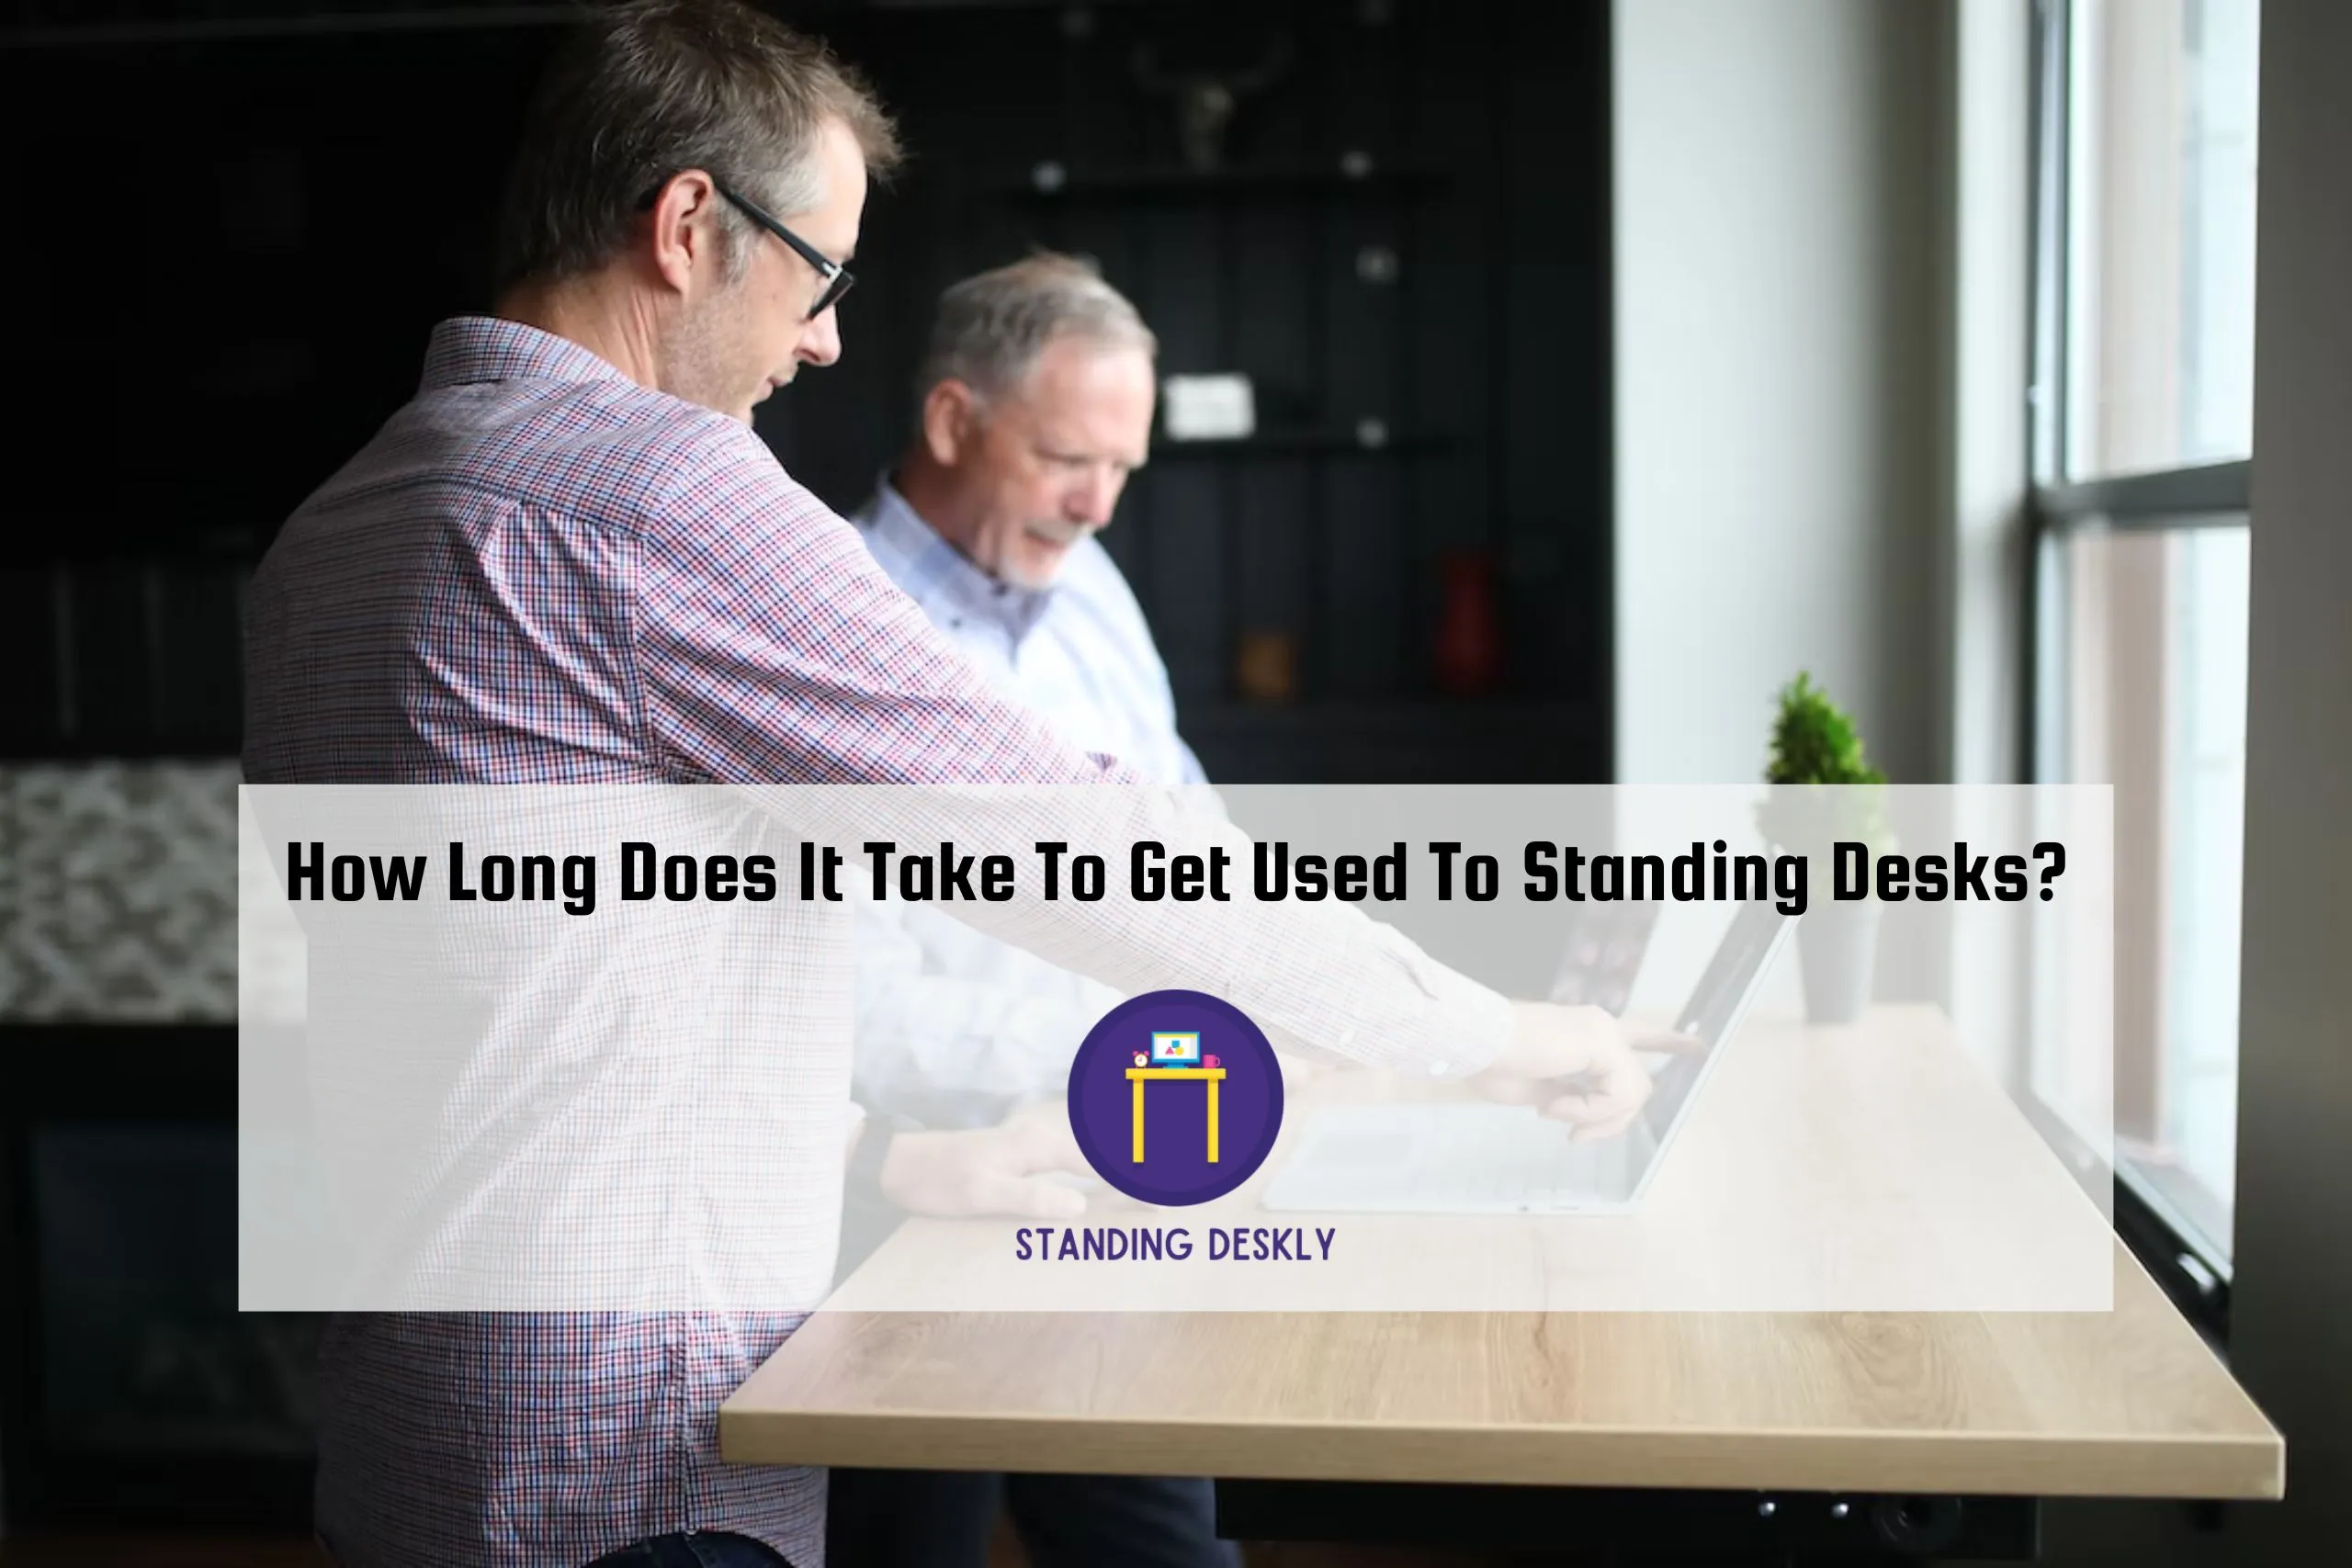 How Long Does It Take To Get Used To Standing Desks